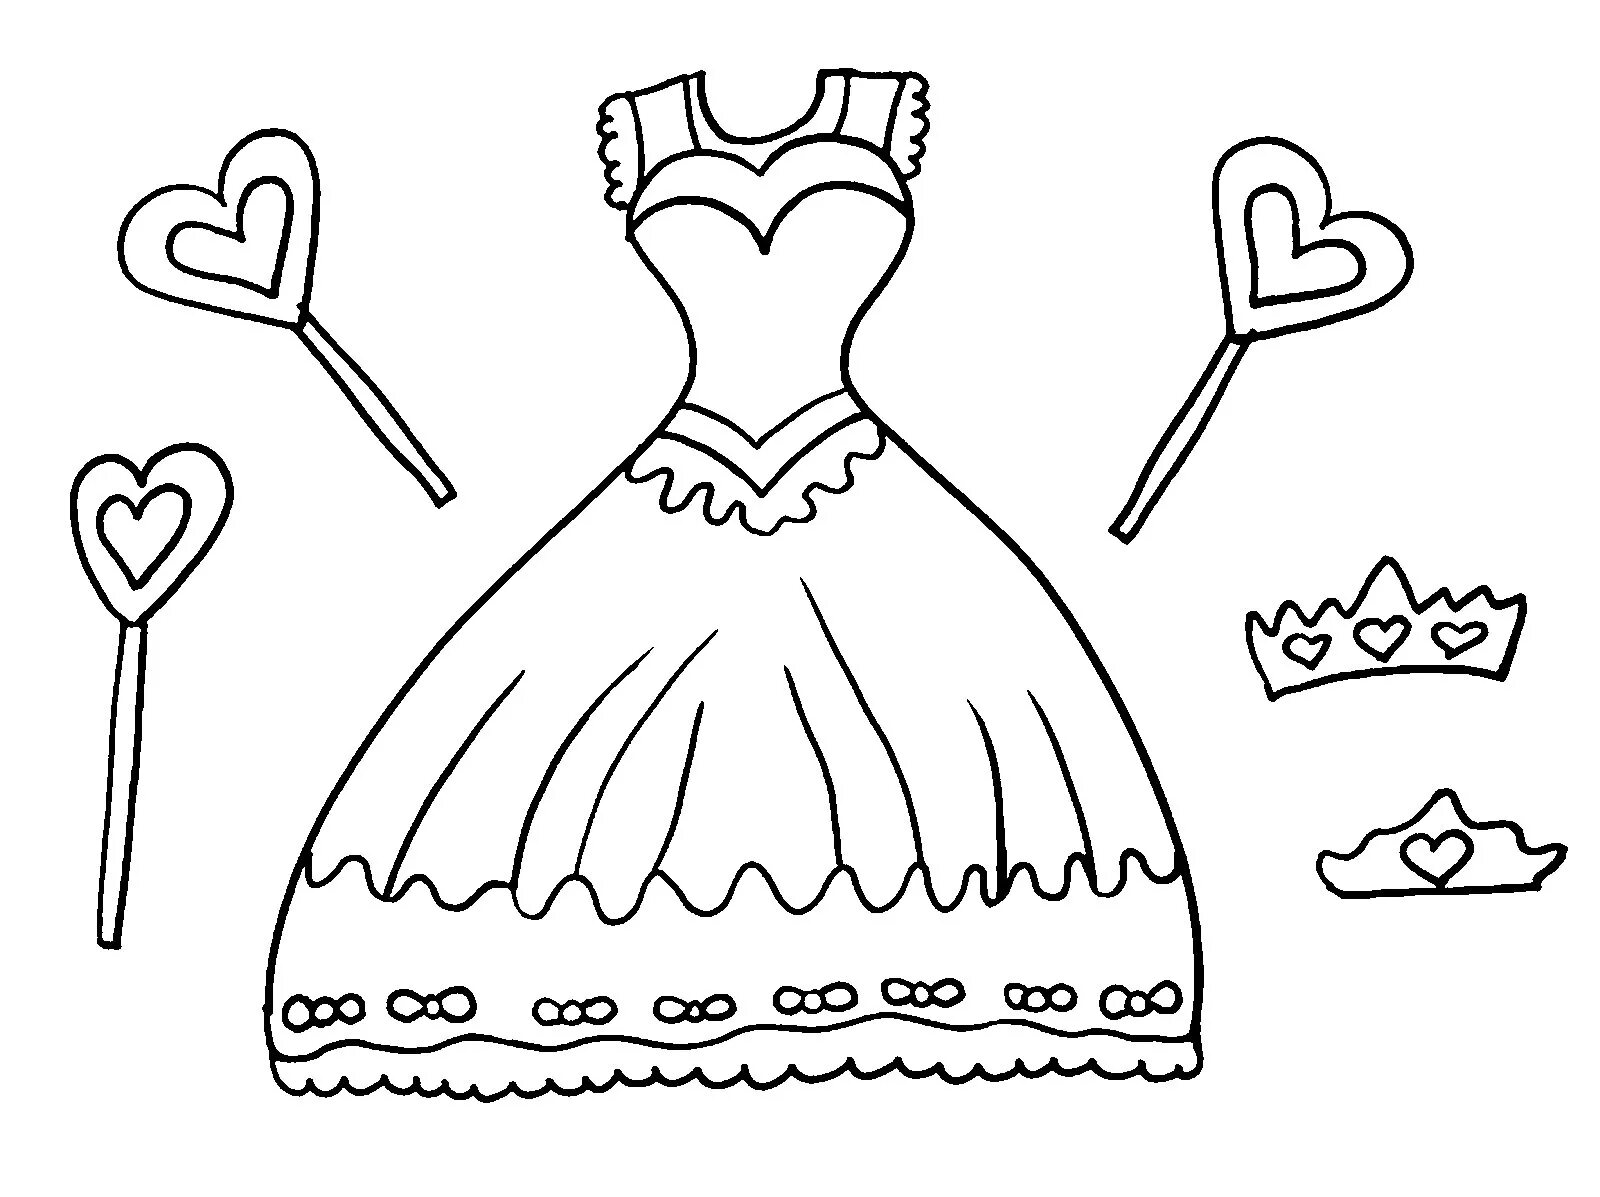 Coloring book elegant doll dress for children 4-5 years old